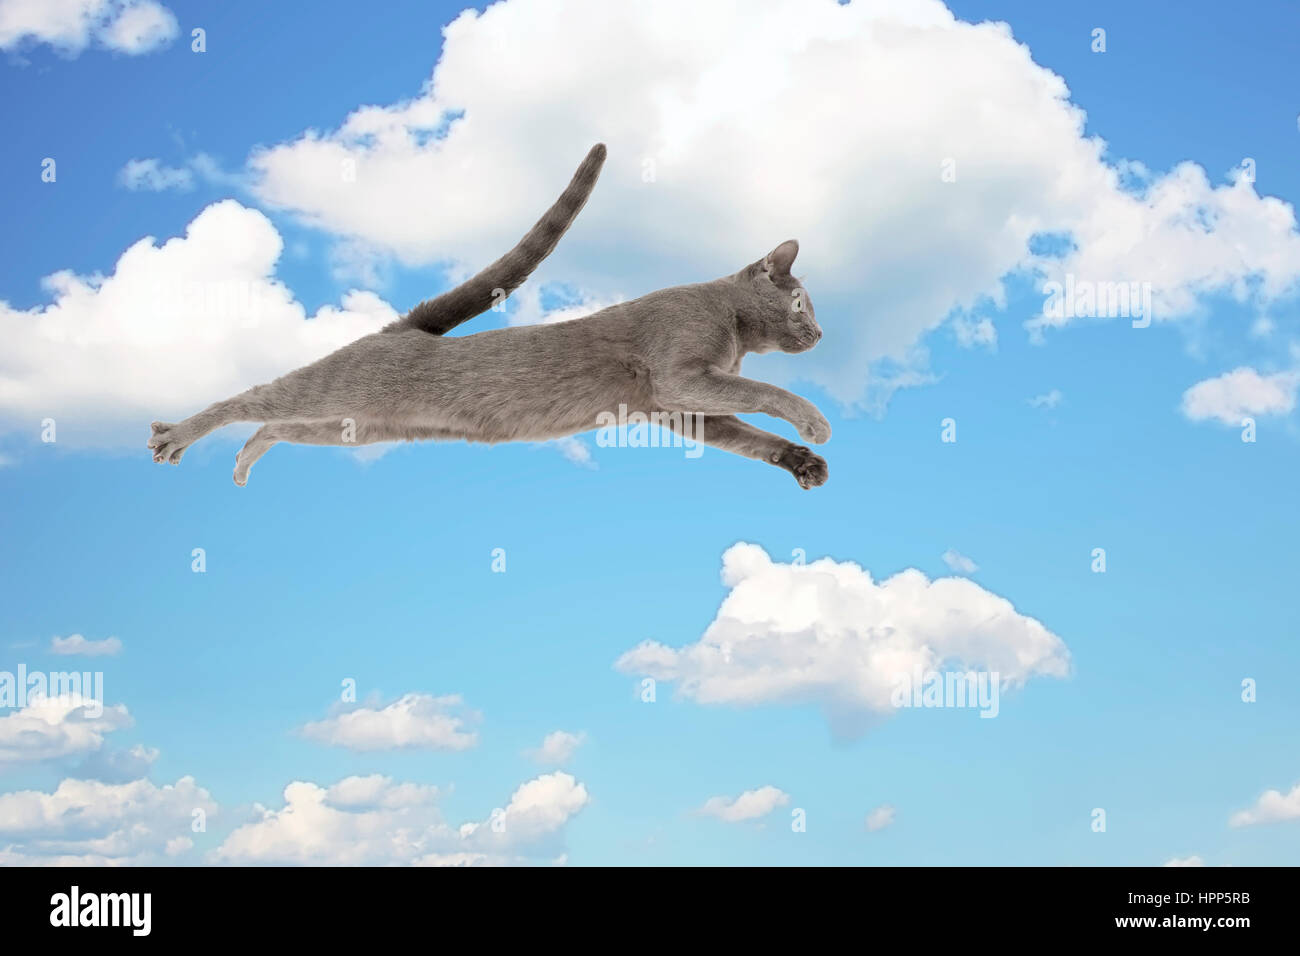 Cat flies through the air in front of clouded sky, Composing Stock Photo